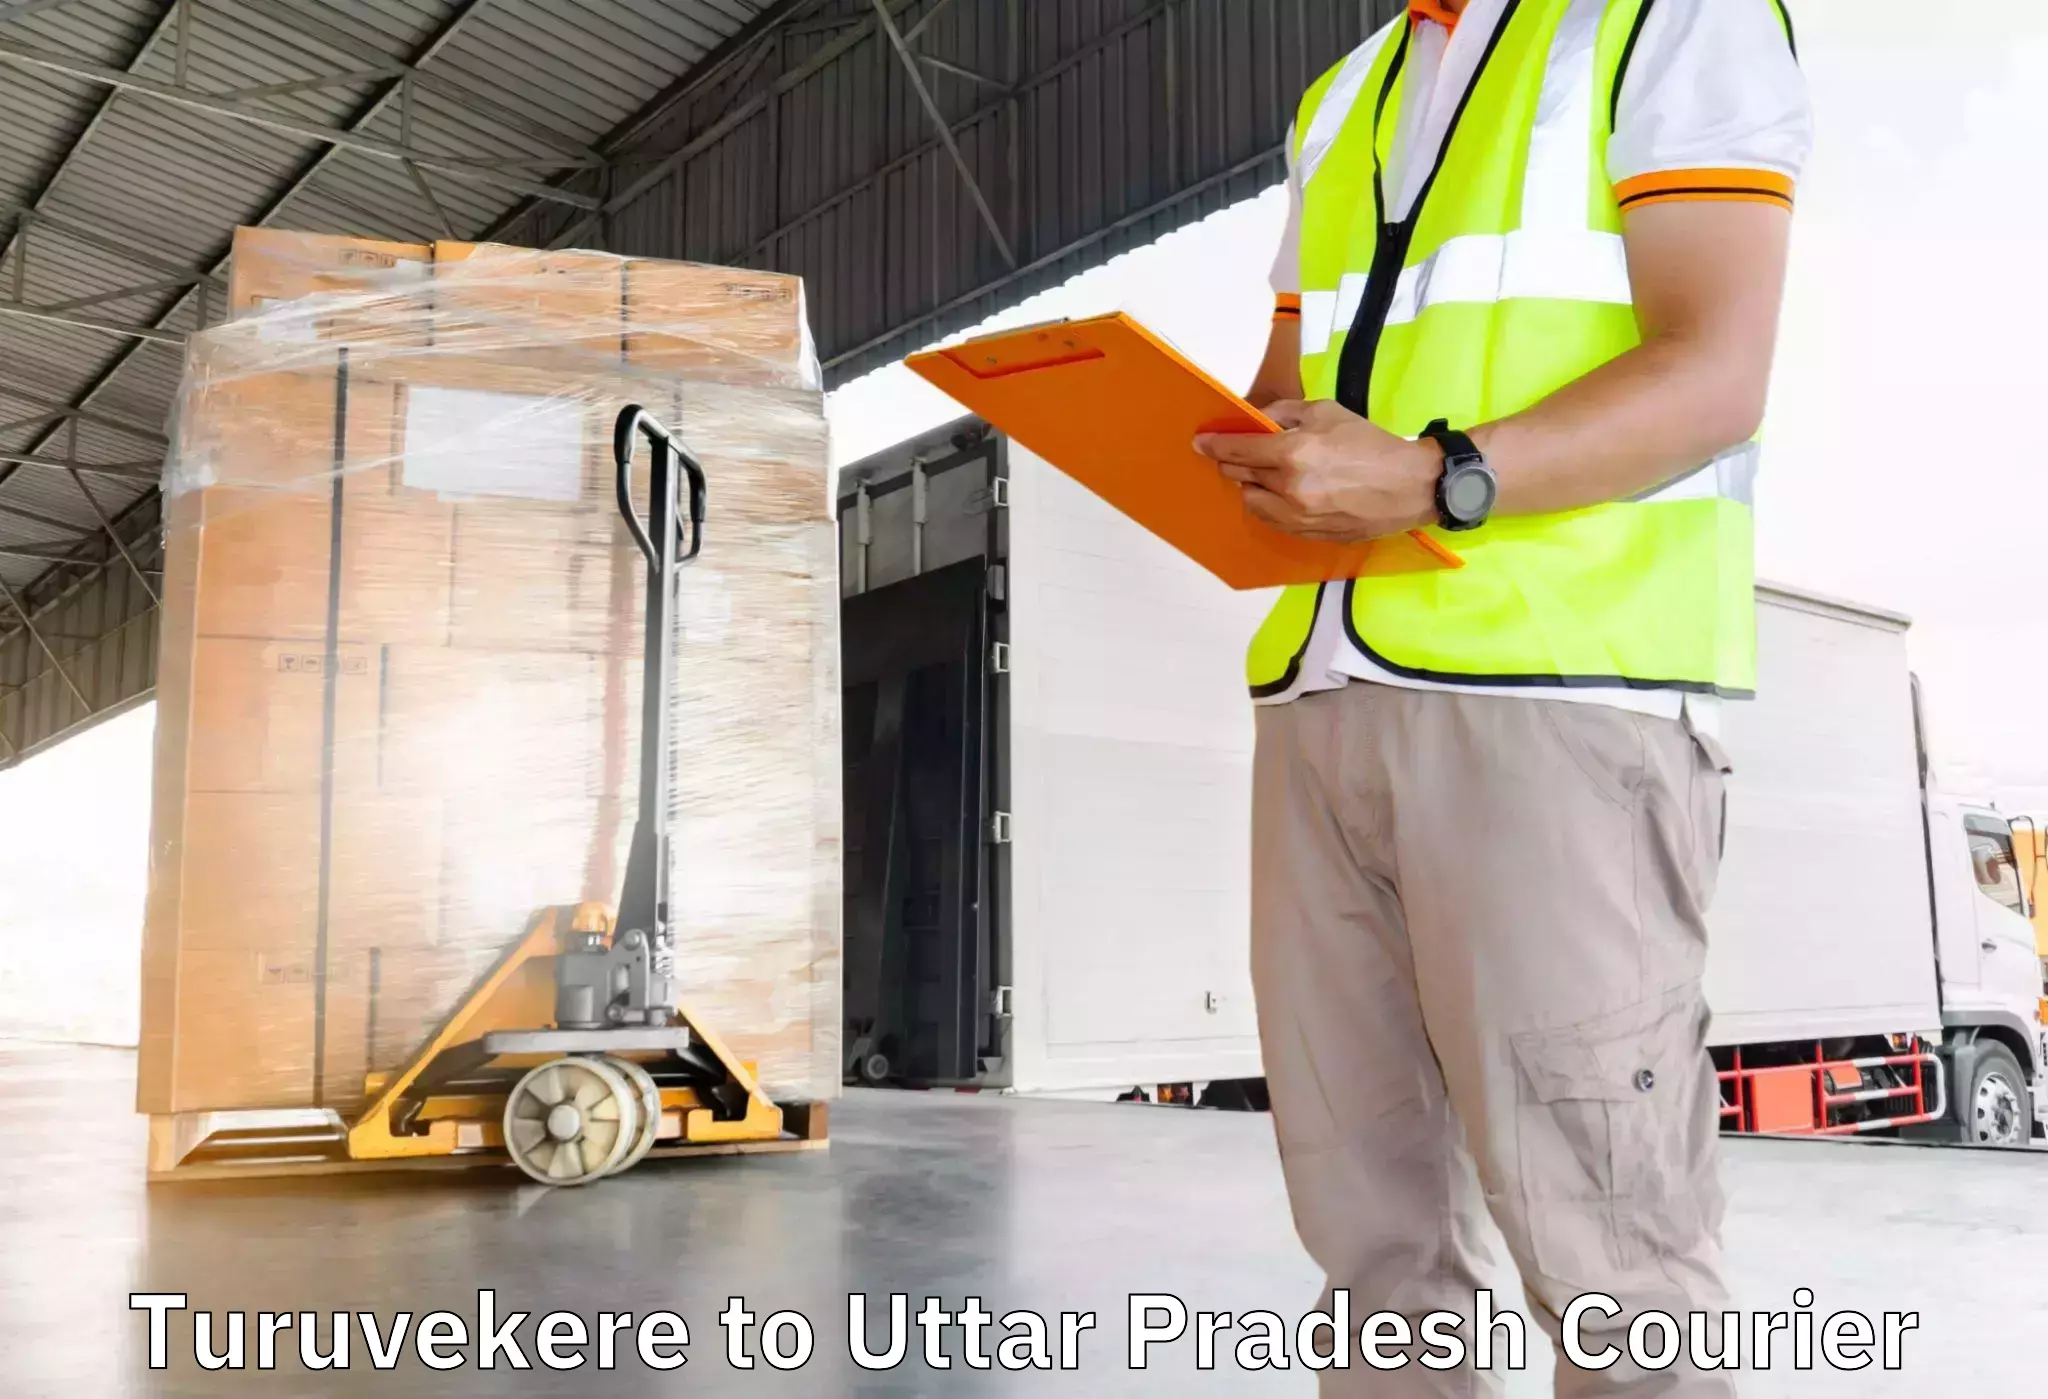 Furniture transport company Turuvekere to Sultanpur